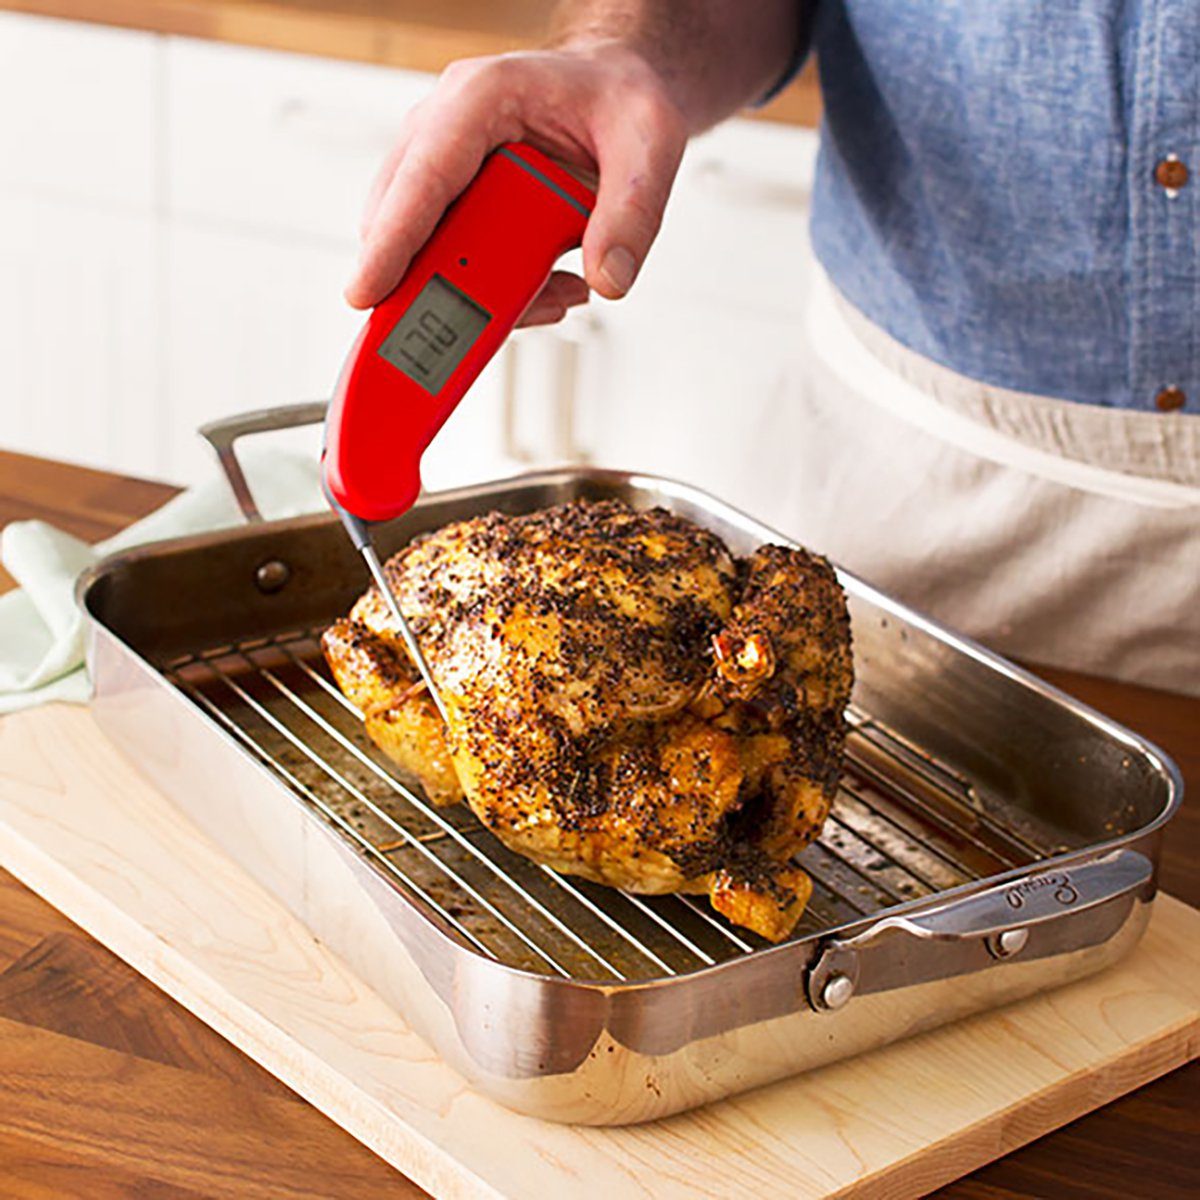 How To Use a Kitchen Thermometer